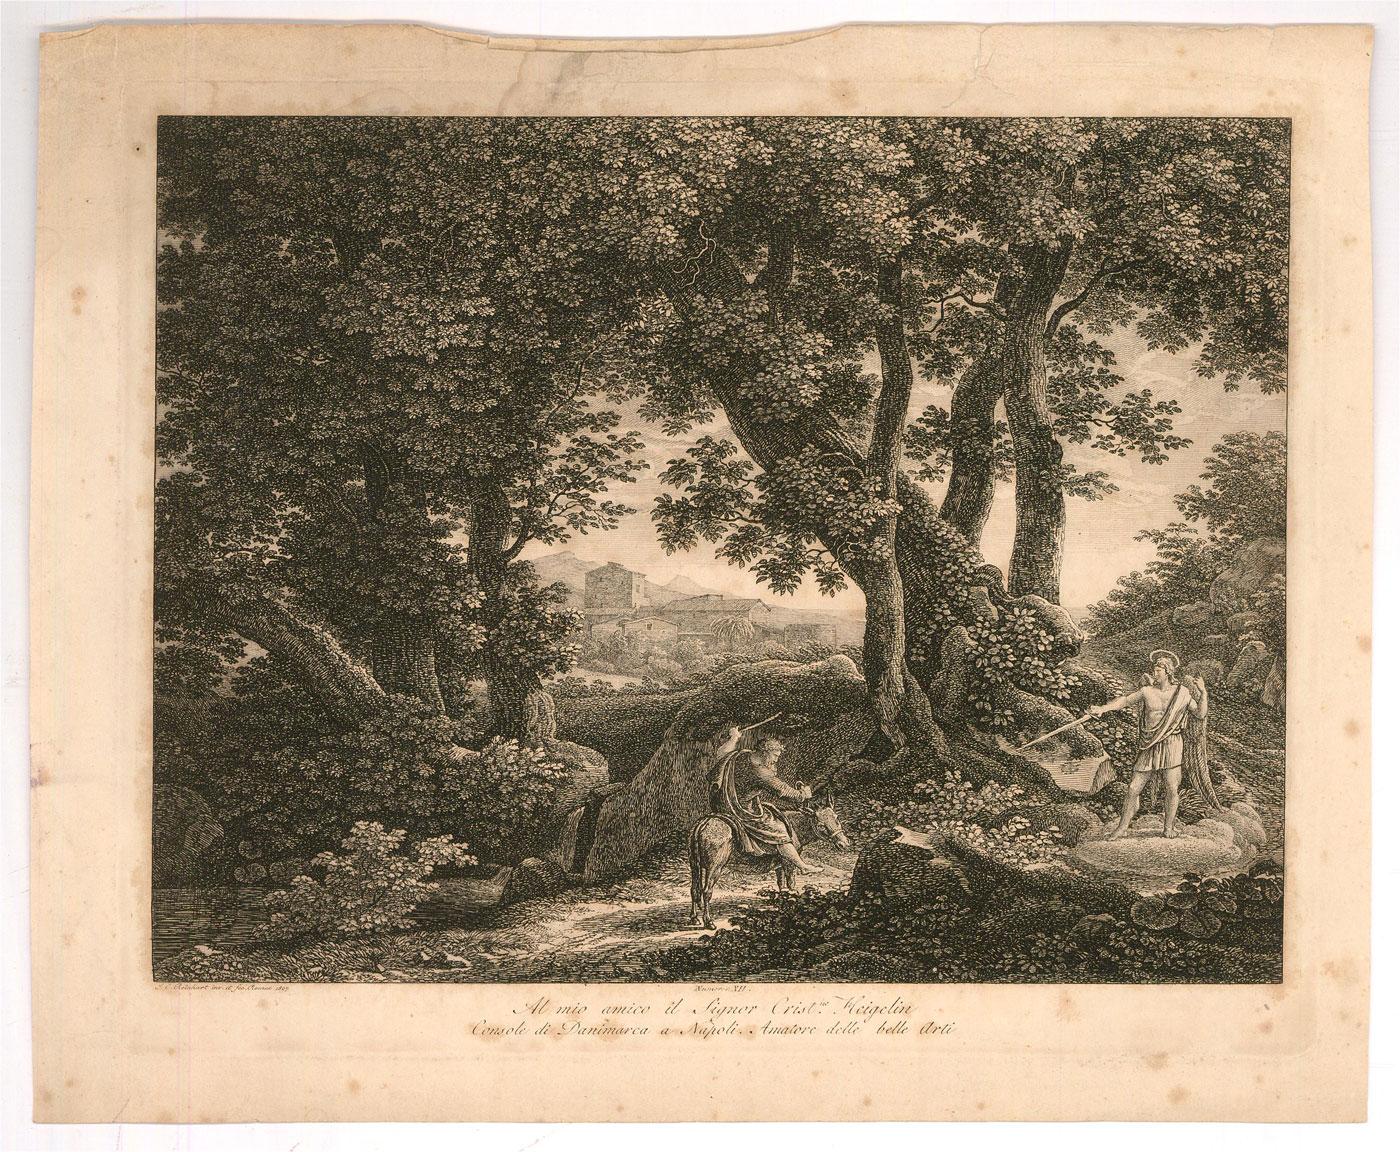 A fine early 19th Century engraving, showing the Biblical scene of Balaam's Donkey. The artist has inscribed their name and date in plate at the lower edge, along with an inscription in Italian with the artist's dedication. On wove.
